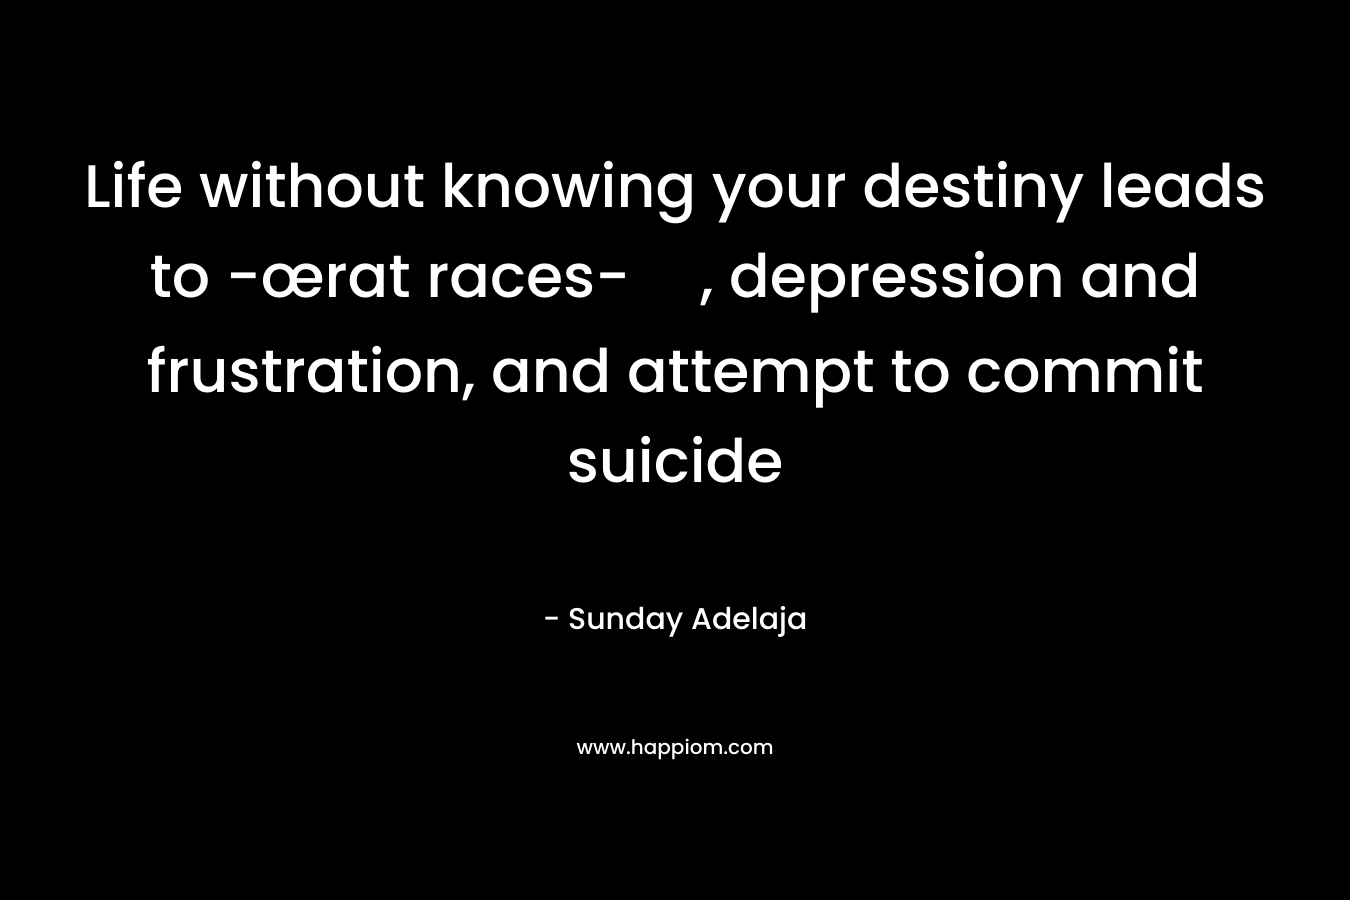 Life without knowing your destiny leads to -œrat races-, depression and frustration, and attempt to commit suicide